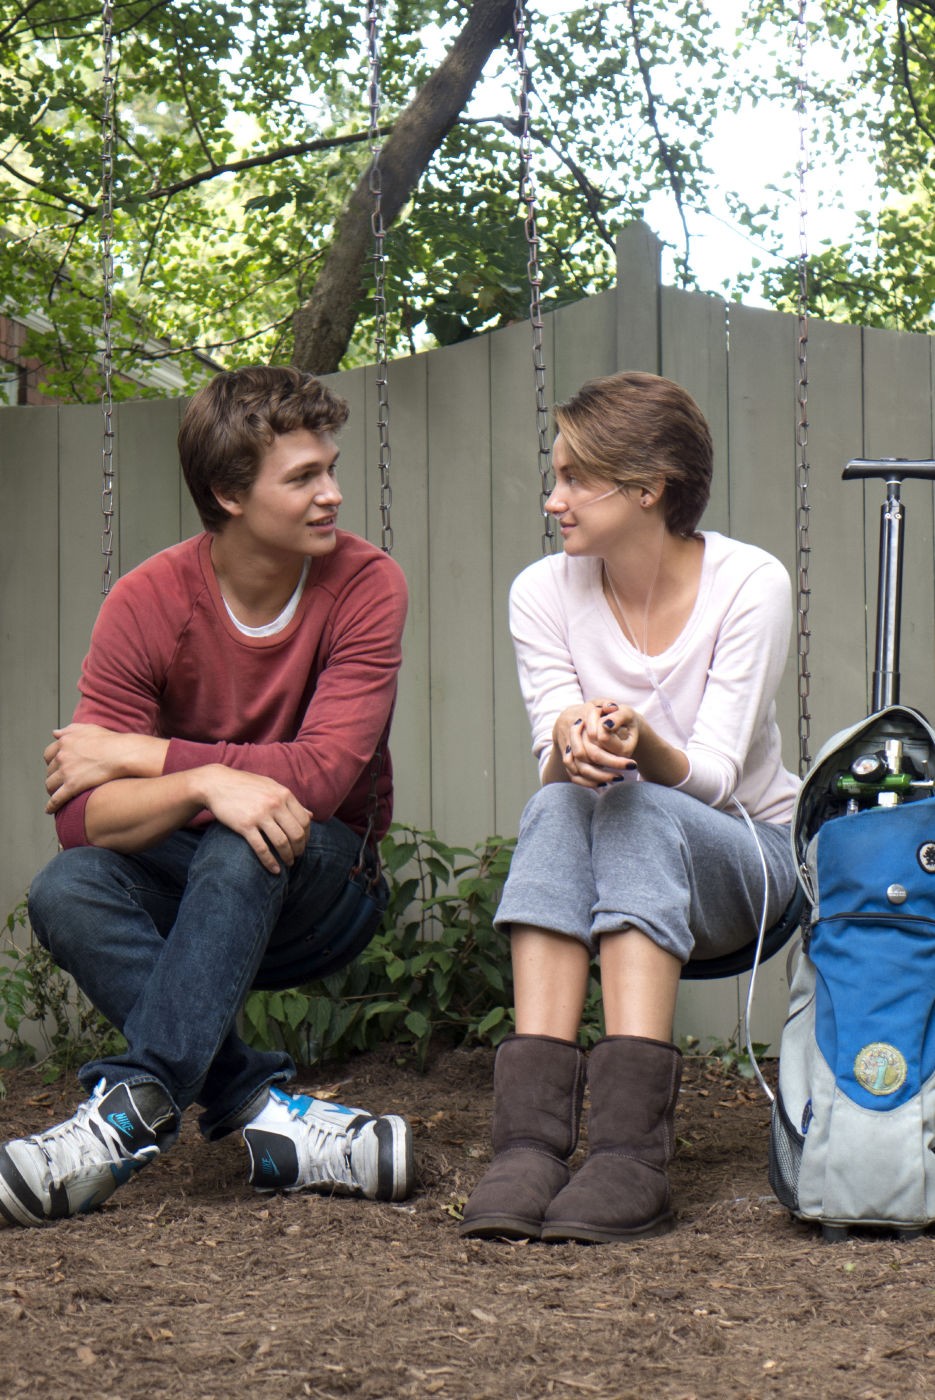 Ansel Elgort stars as Augustus Waters and Shailene Woodley stars as Hazel Grace Lancaster in 20th Century Fox's The Fault in Our Stars (2014)